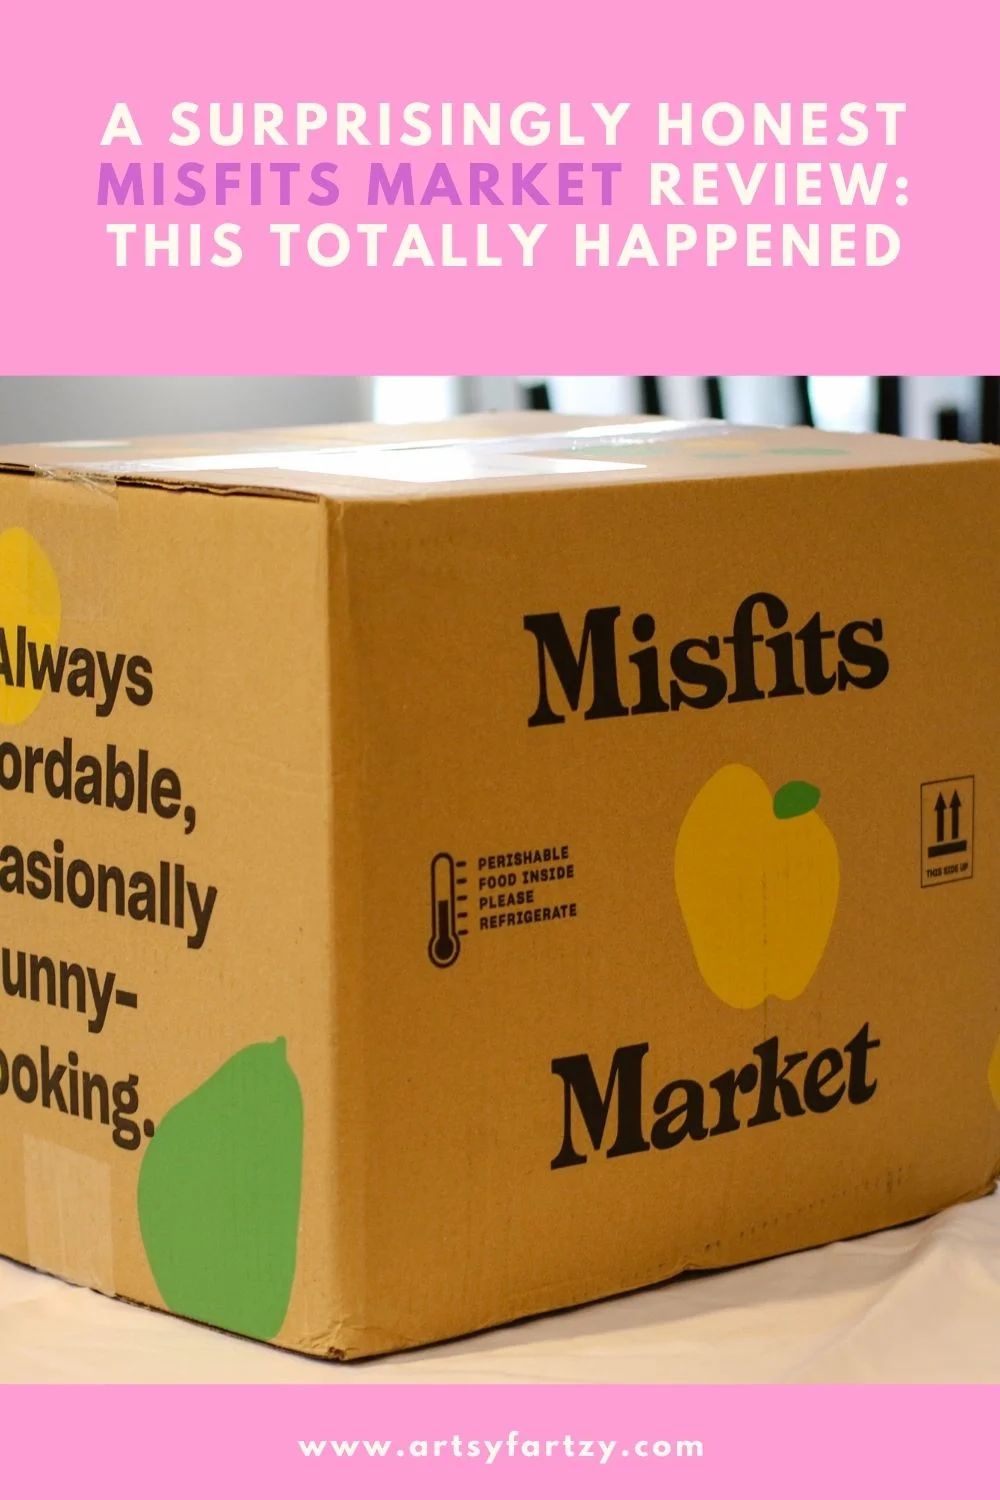 Misfits Market Review and Misfits Market Customer Service experience by www.artsyfartzy.com